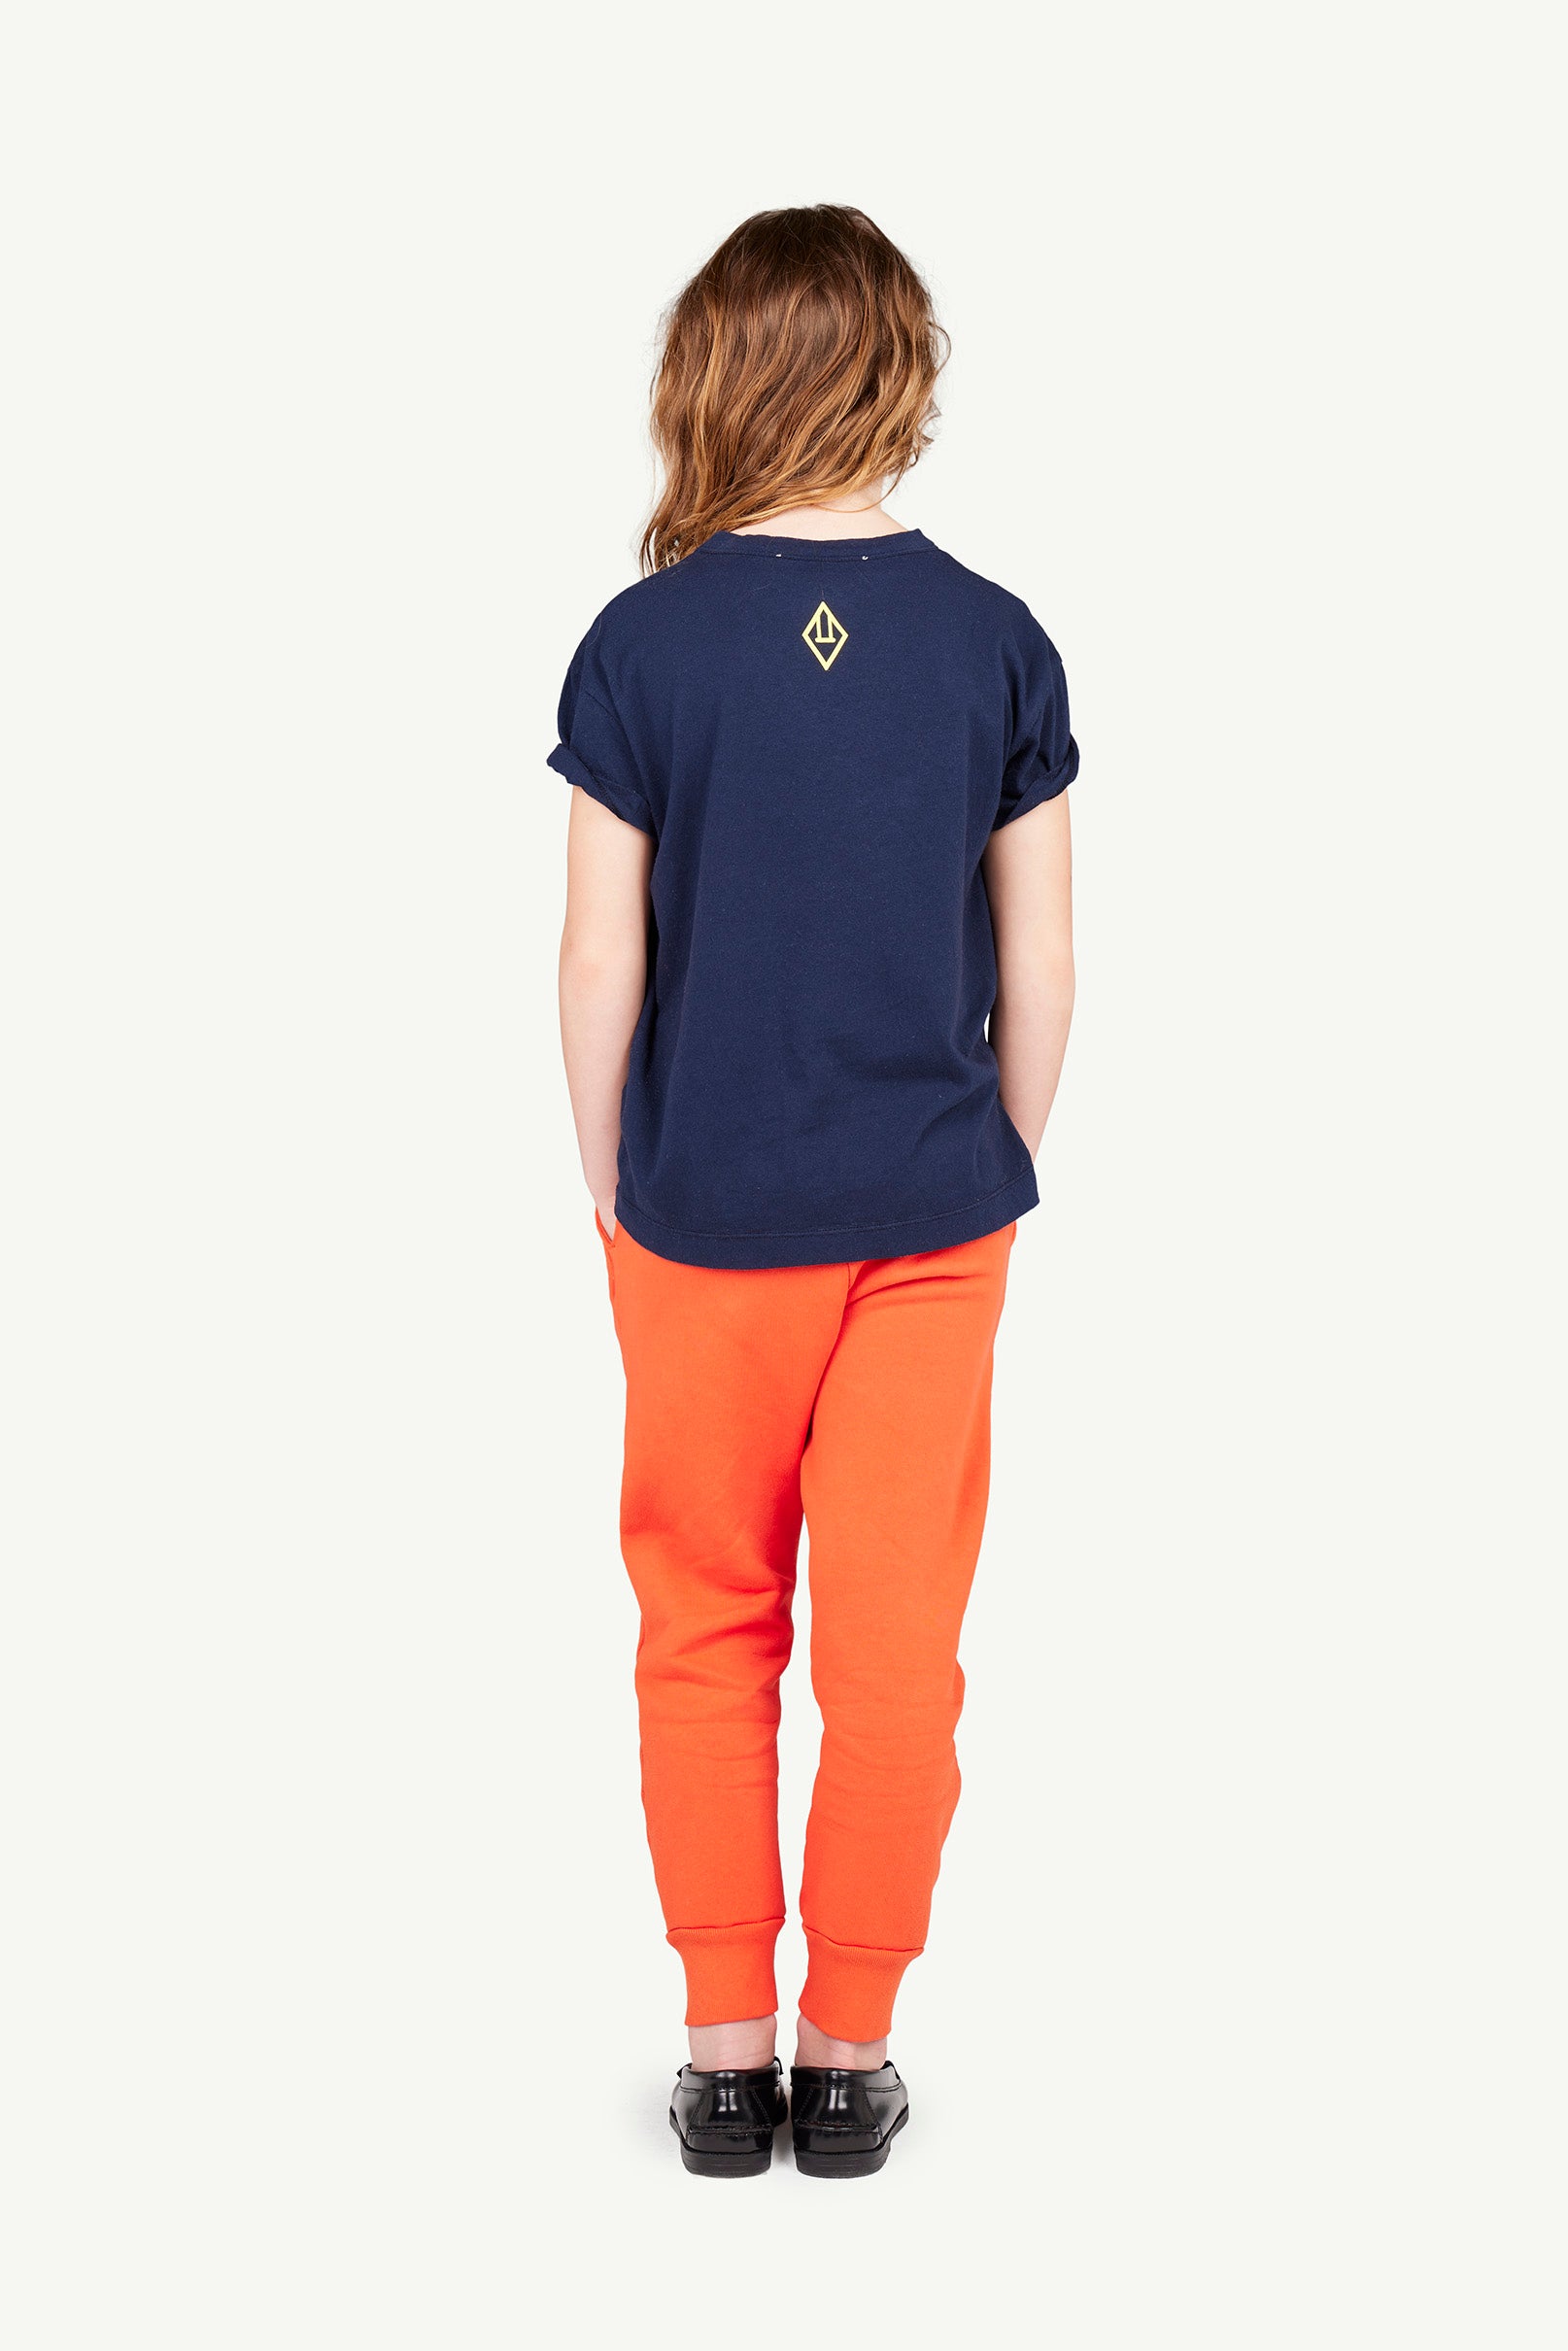 The Animals Observatory | Orion Kids T-Shirt- Navy